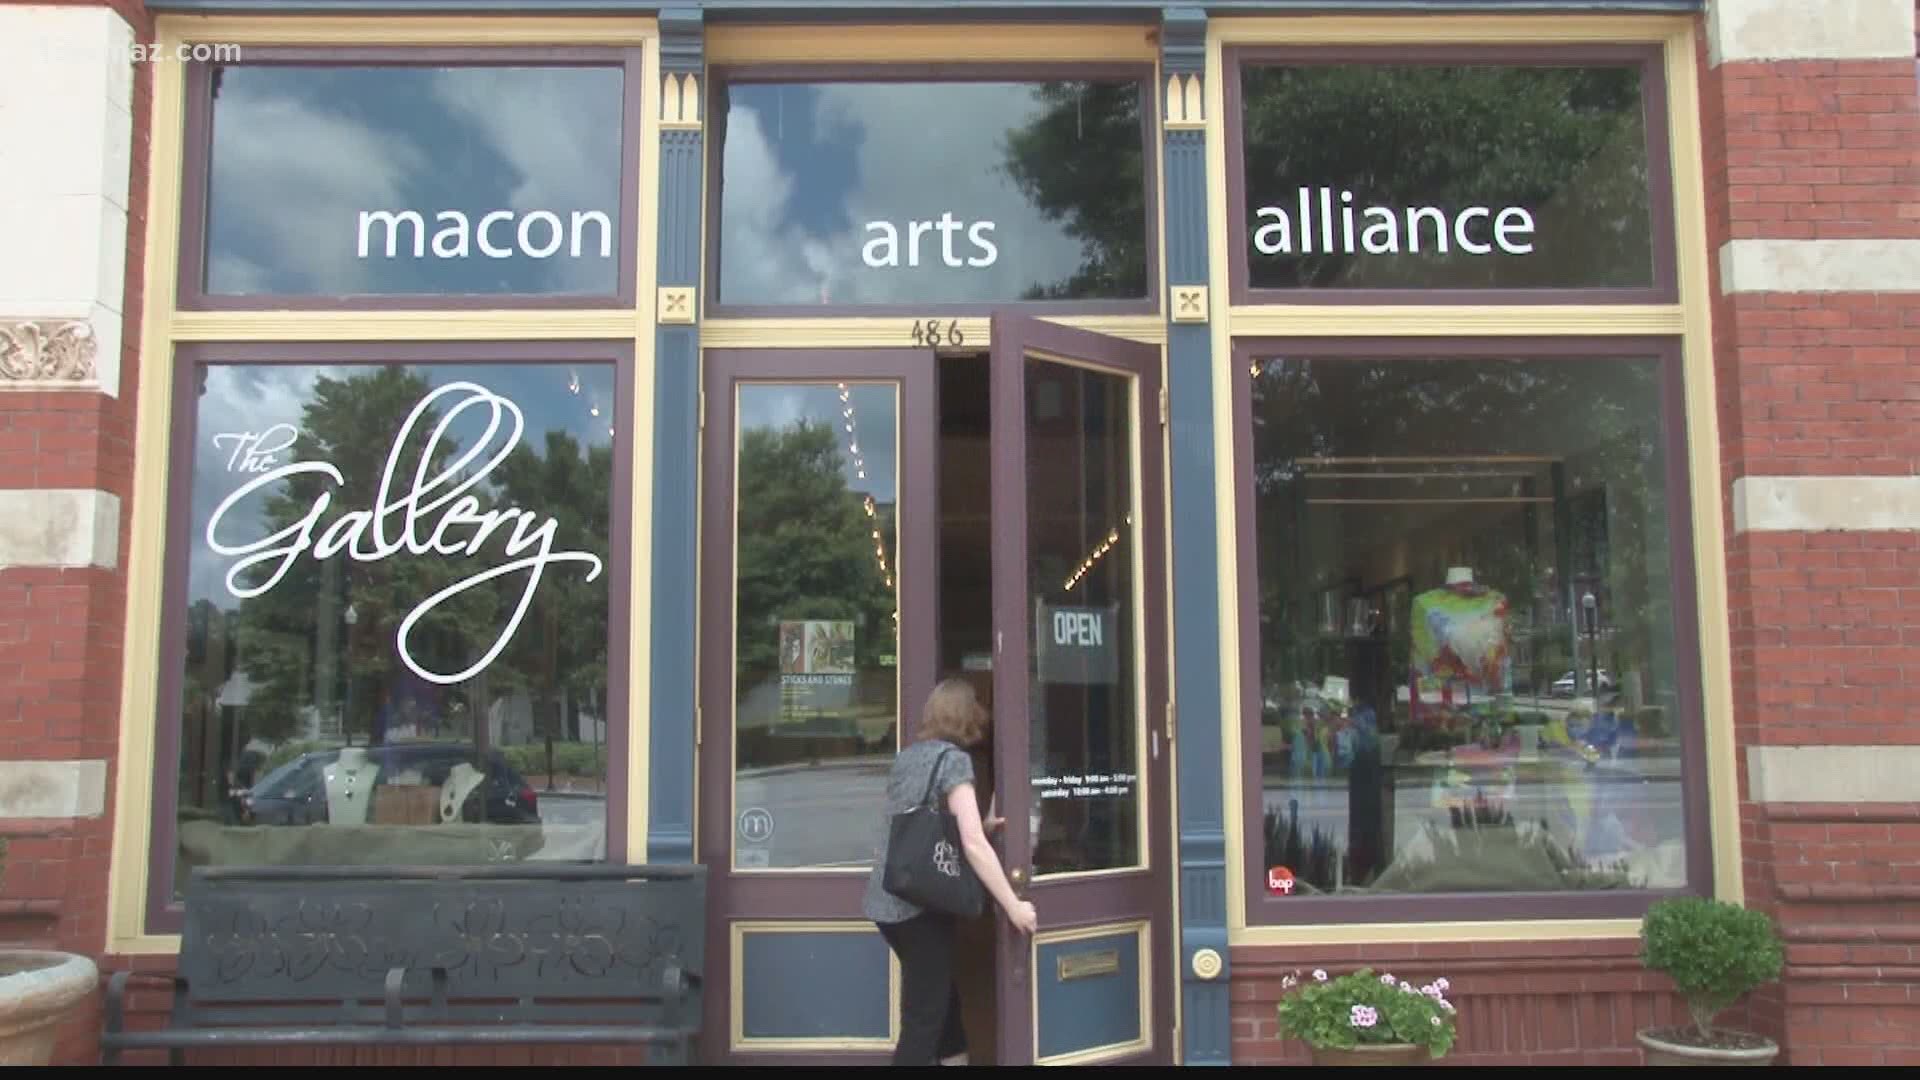 Even though the pandemic has hit artists hard, places like the Macon Arts Alliance are continuing to put local artists in the spotlight